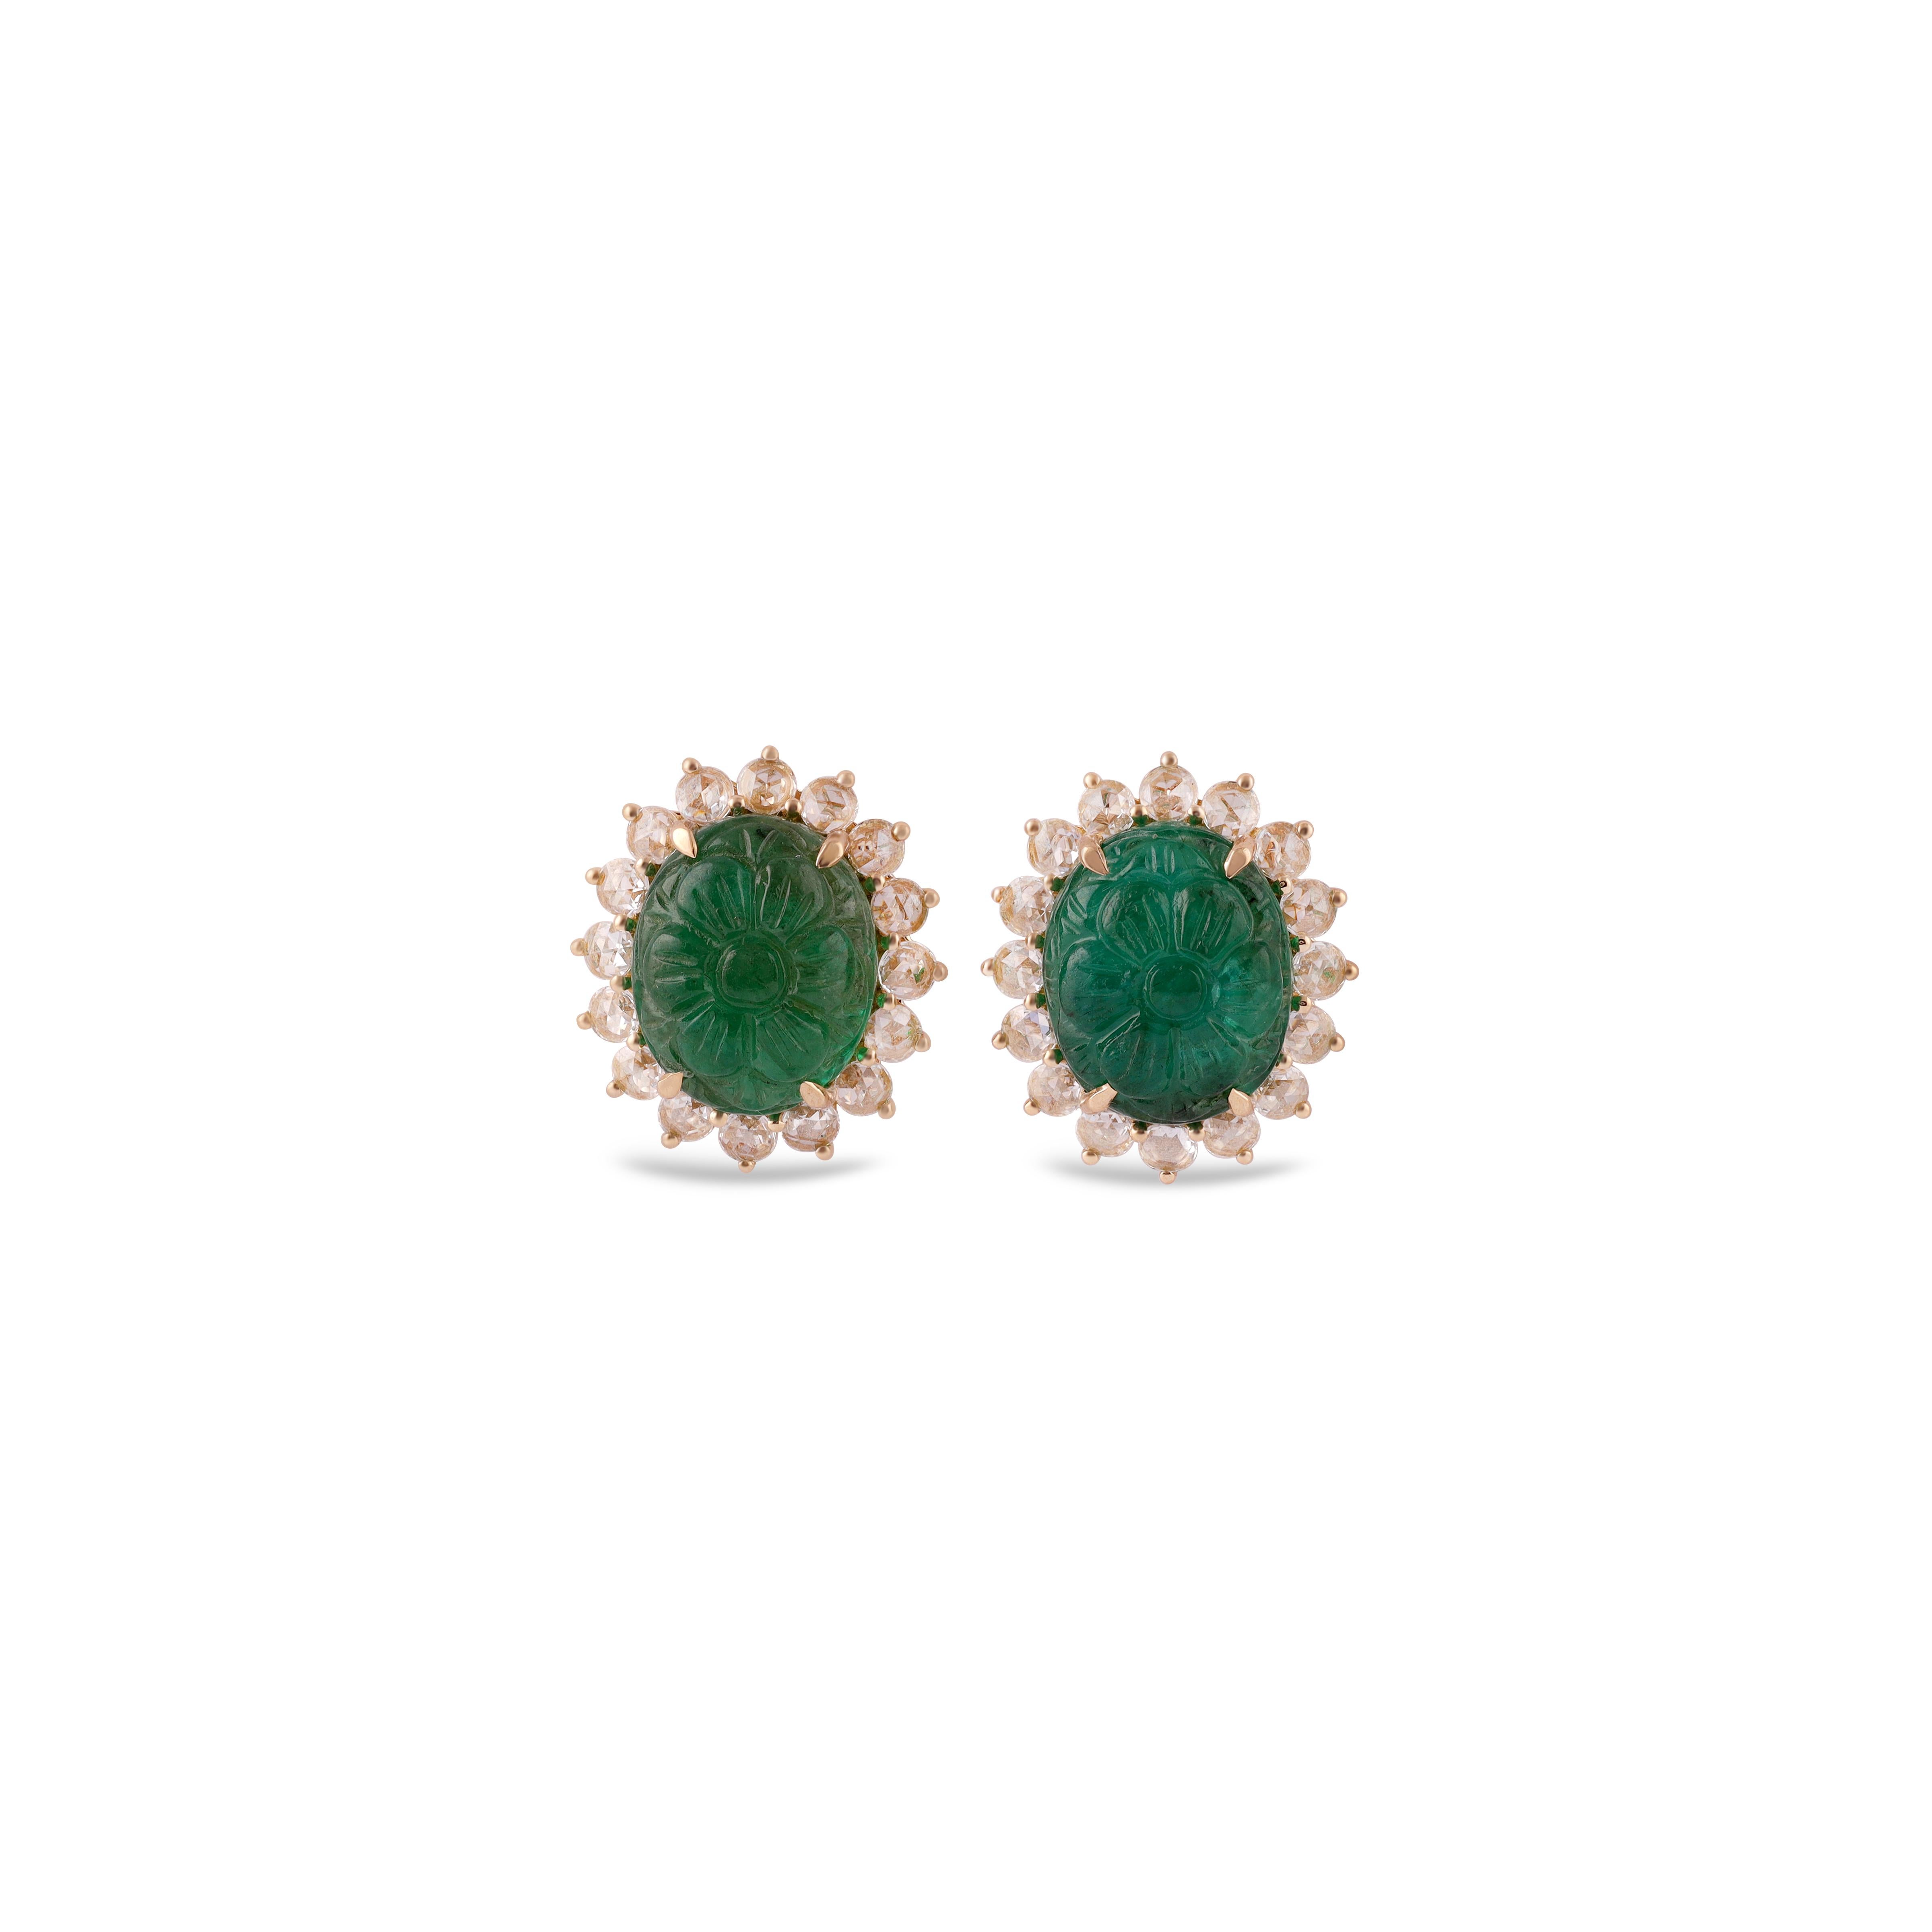 This is an elegant Carved emerald & diamond Earring studded in 18k Yellow gold with 2 piece of oval Cut  shaped  Carved Zambian emerald weight 12.37 carat which is surrounded by 32 pieces of round shaped diamonds weight 1.17 carat, this entire